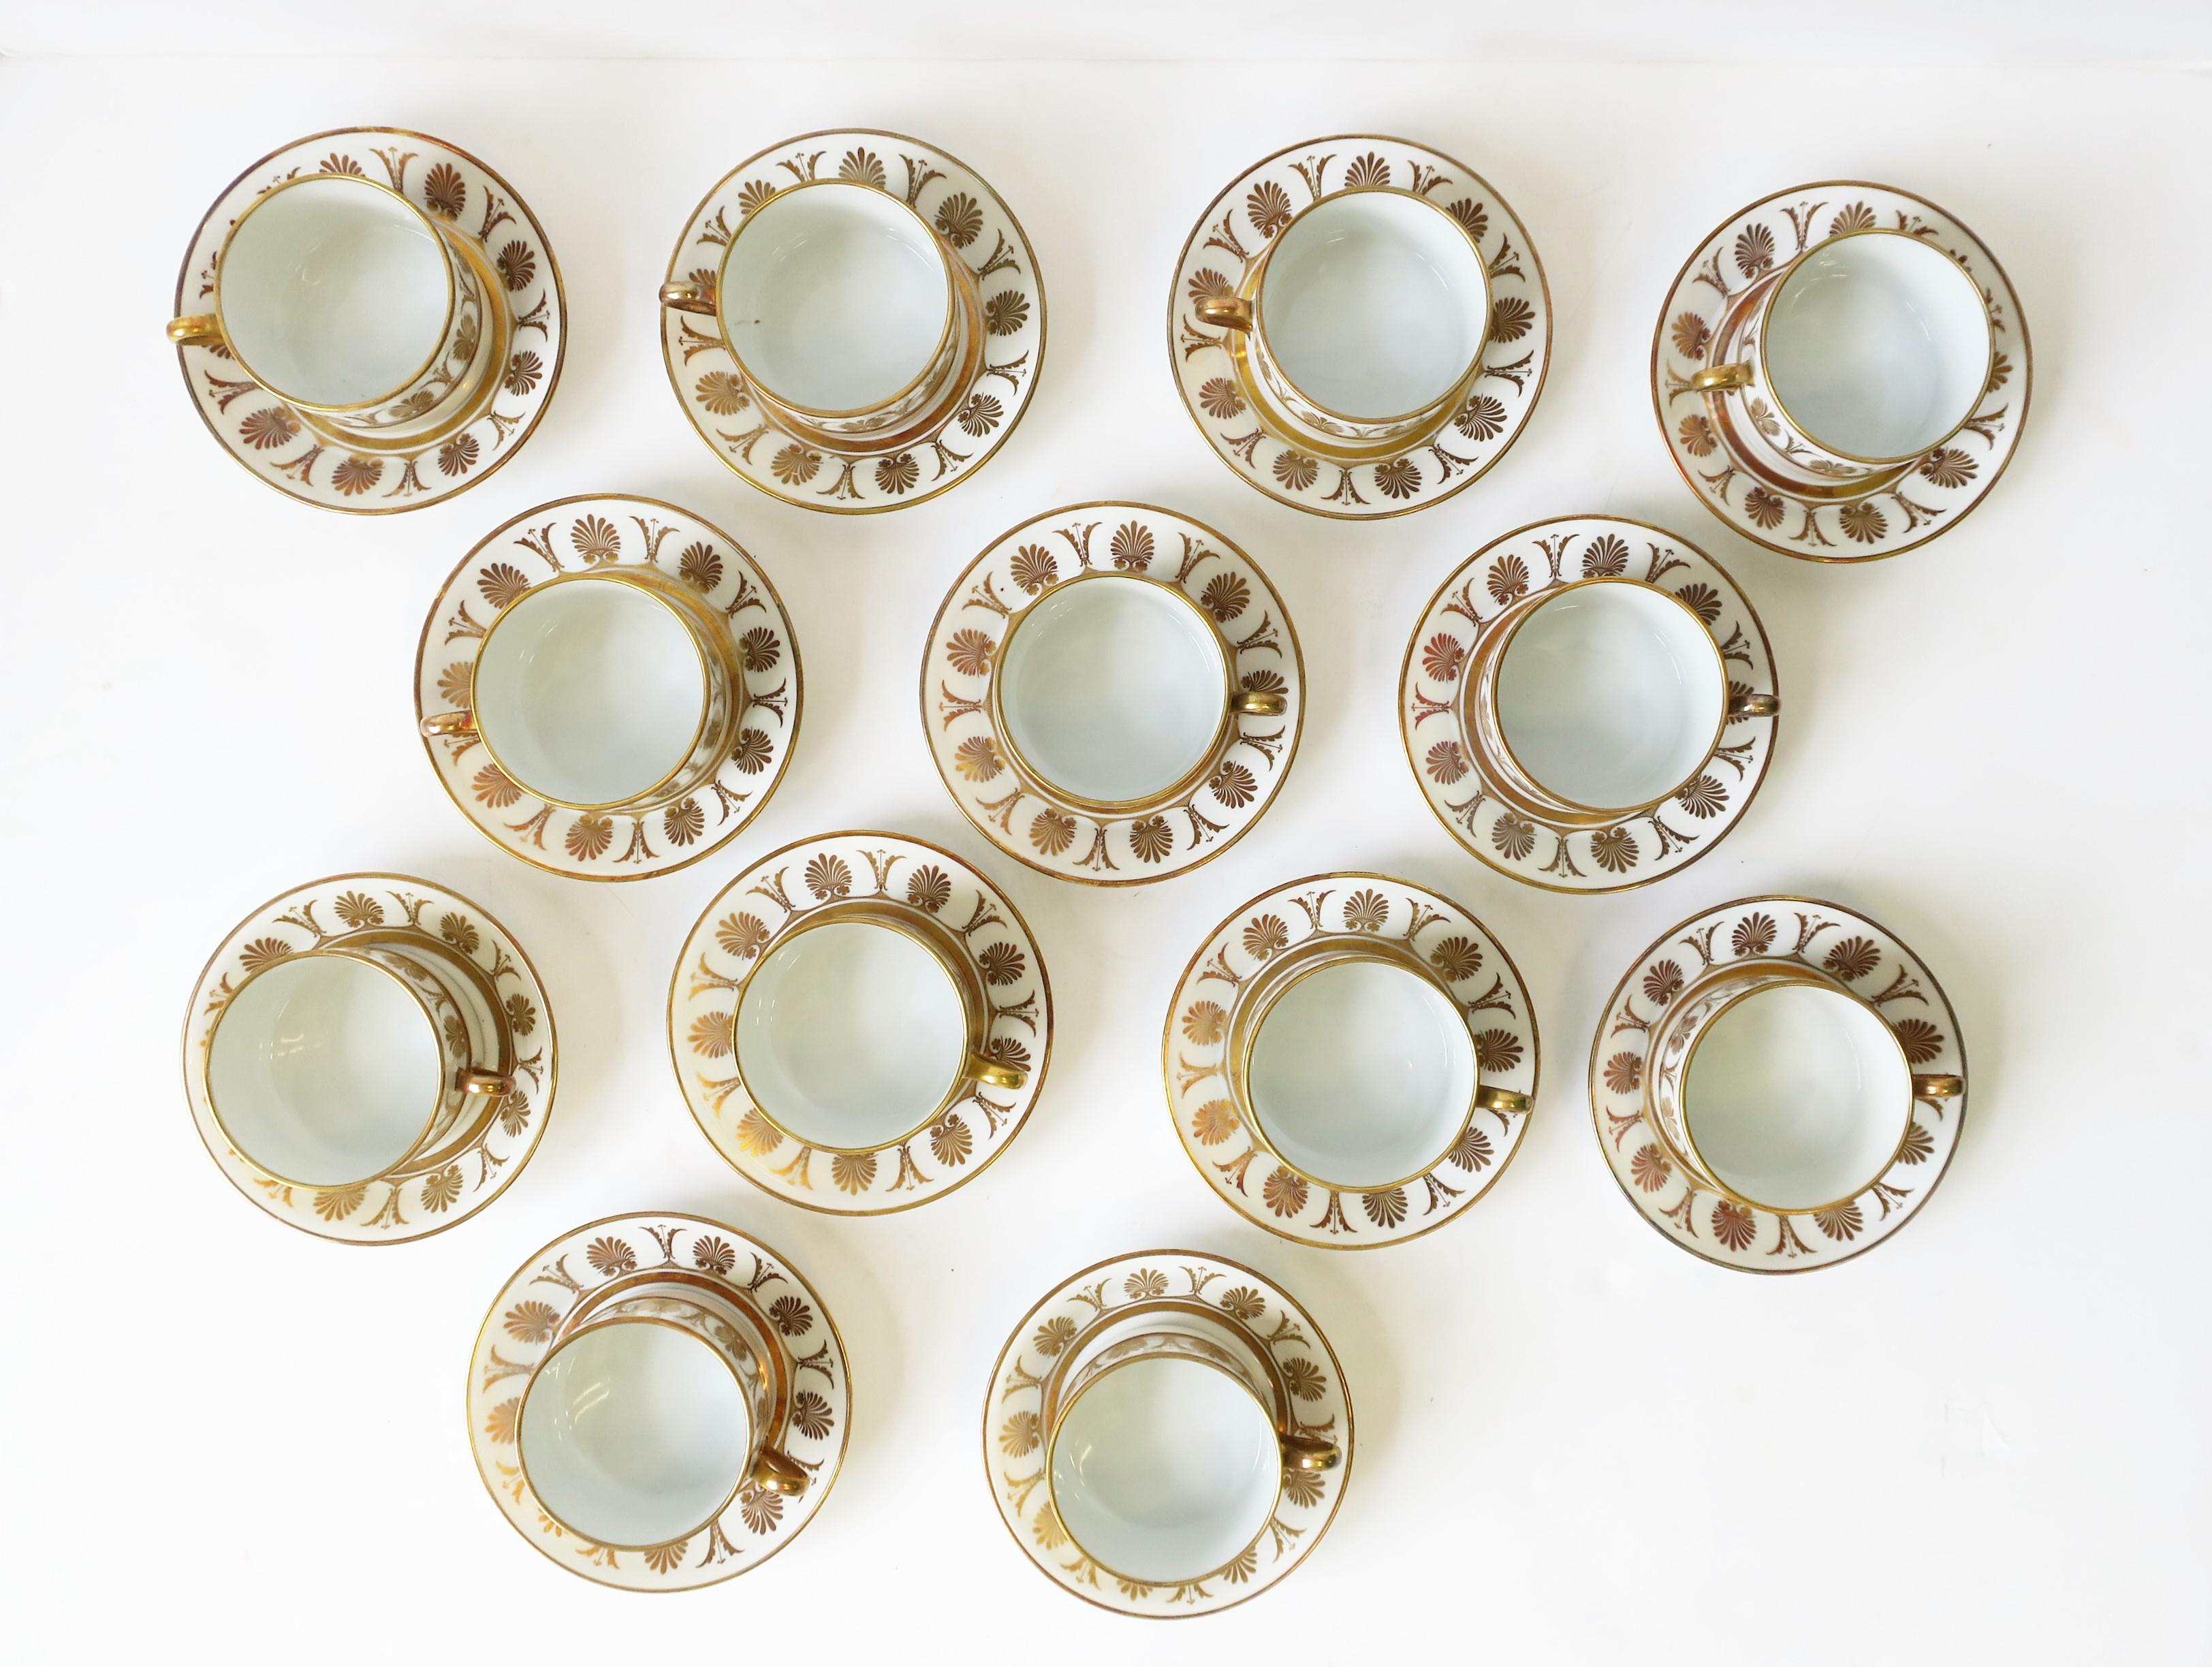 A very beautiful vintage set of 12 Italian designer white porcelain with gold coffee or tea cup and saucer set by Richard Ginori, Italy, circa mid-20th century, 1960s. Colors include: gold on white porcelain. All with maker's mark on bottom: